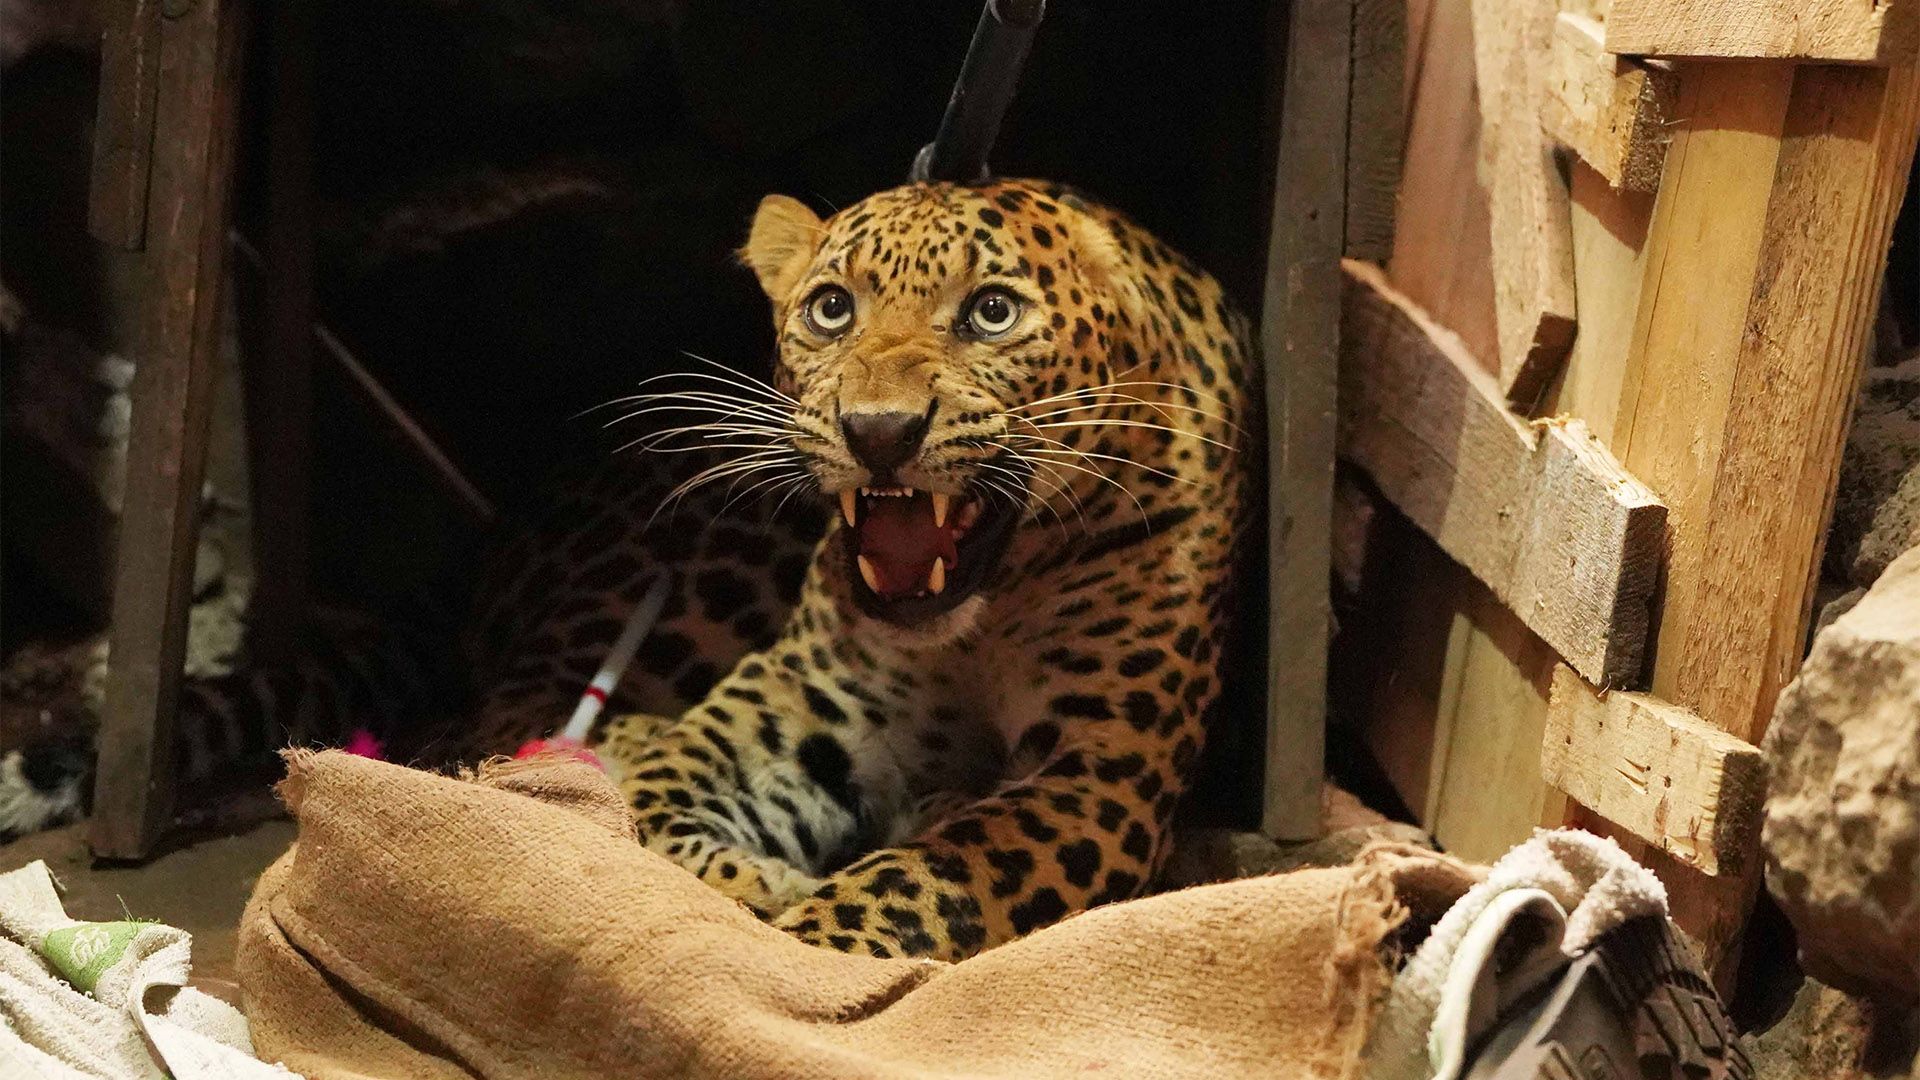 Wildlife Team Saves Leopard Following Attack on Two Residents in Ramnagar, J&K